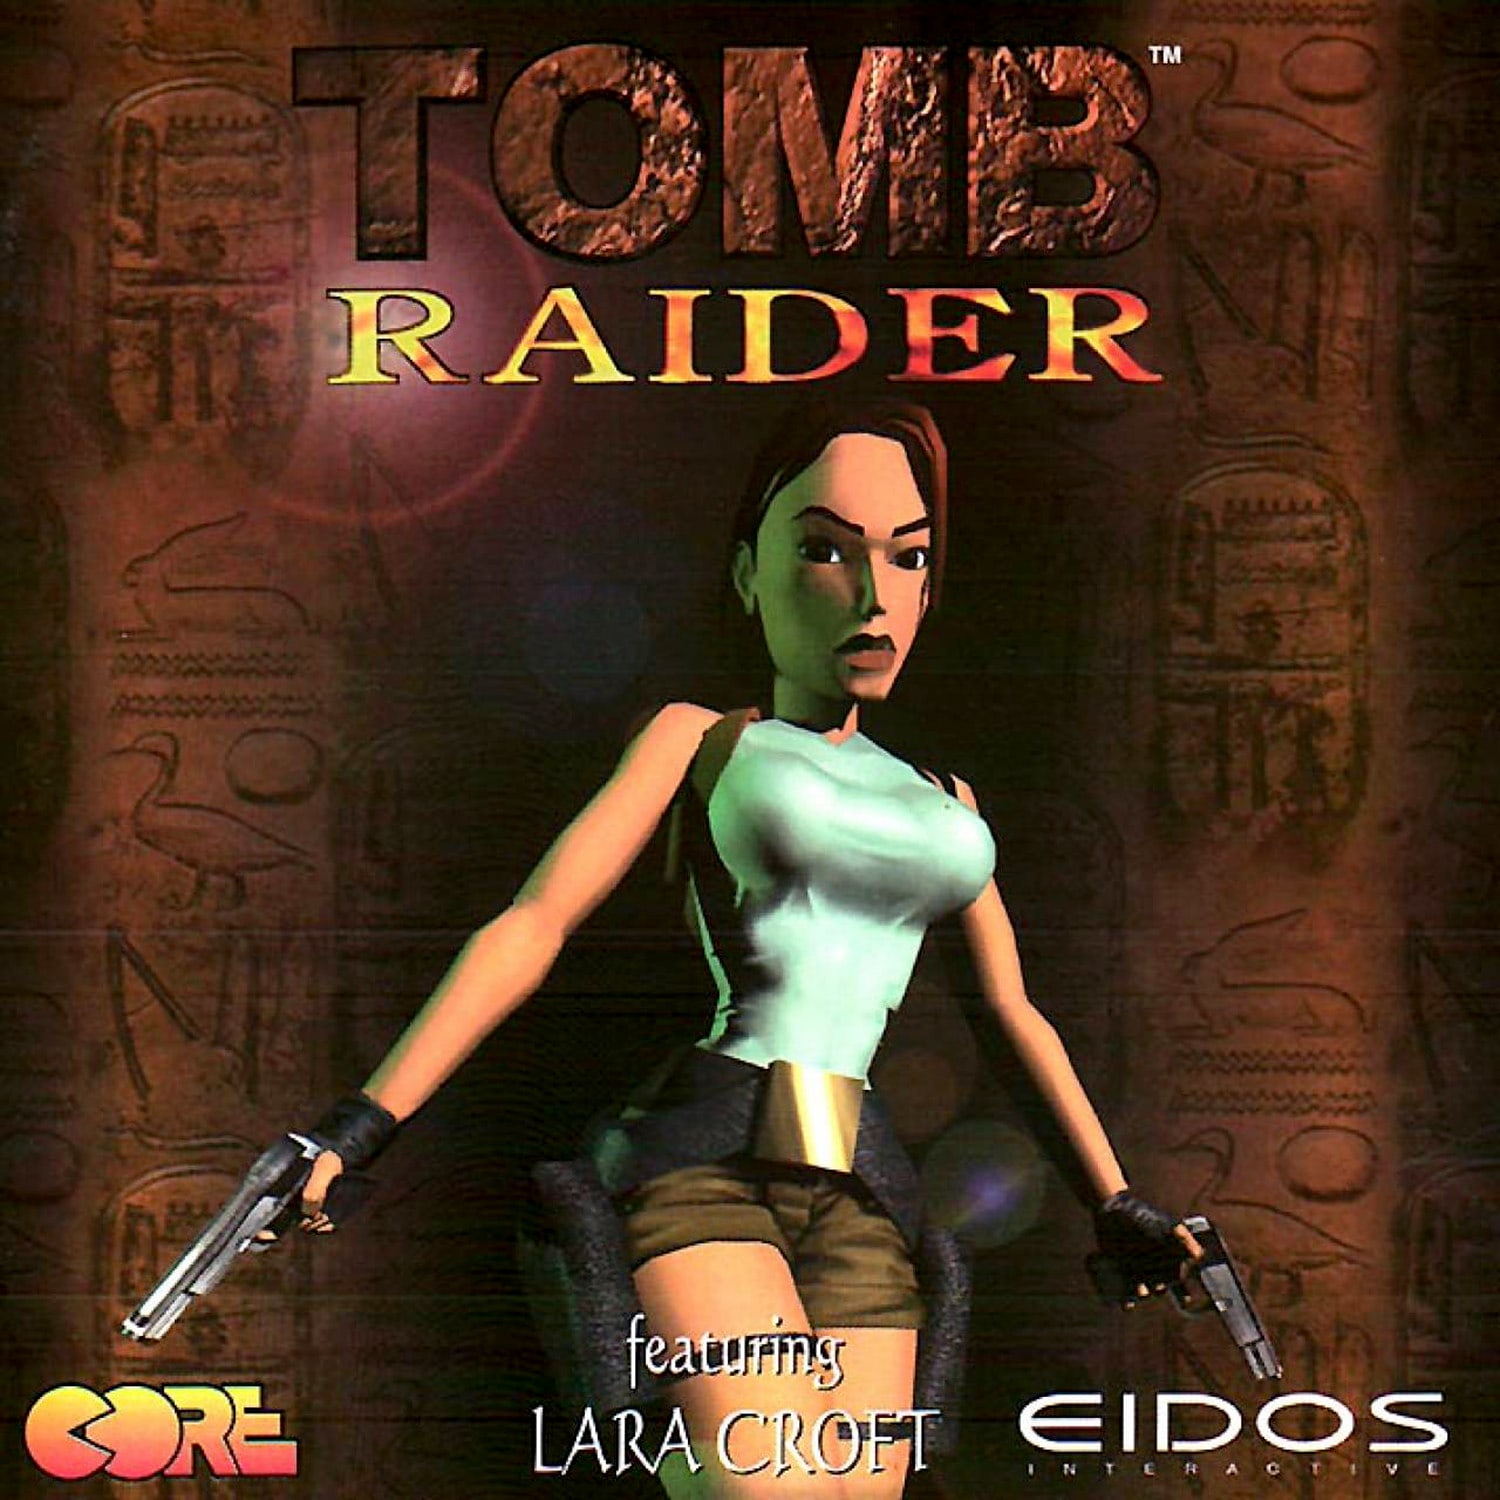 tomb raider angel of darkness pc setteings